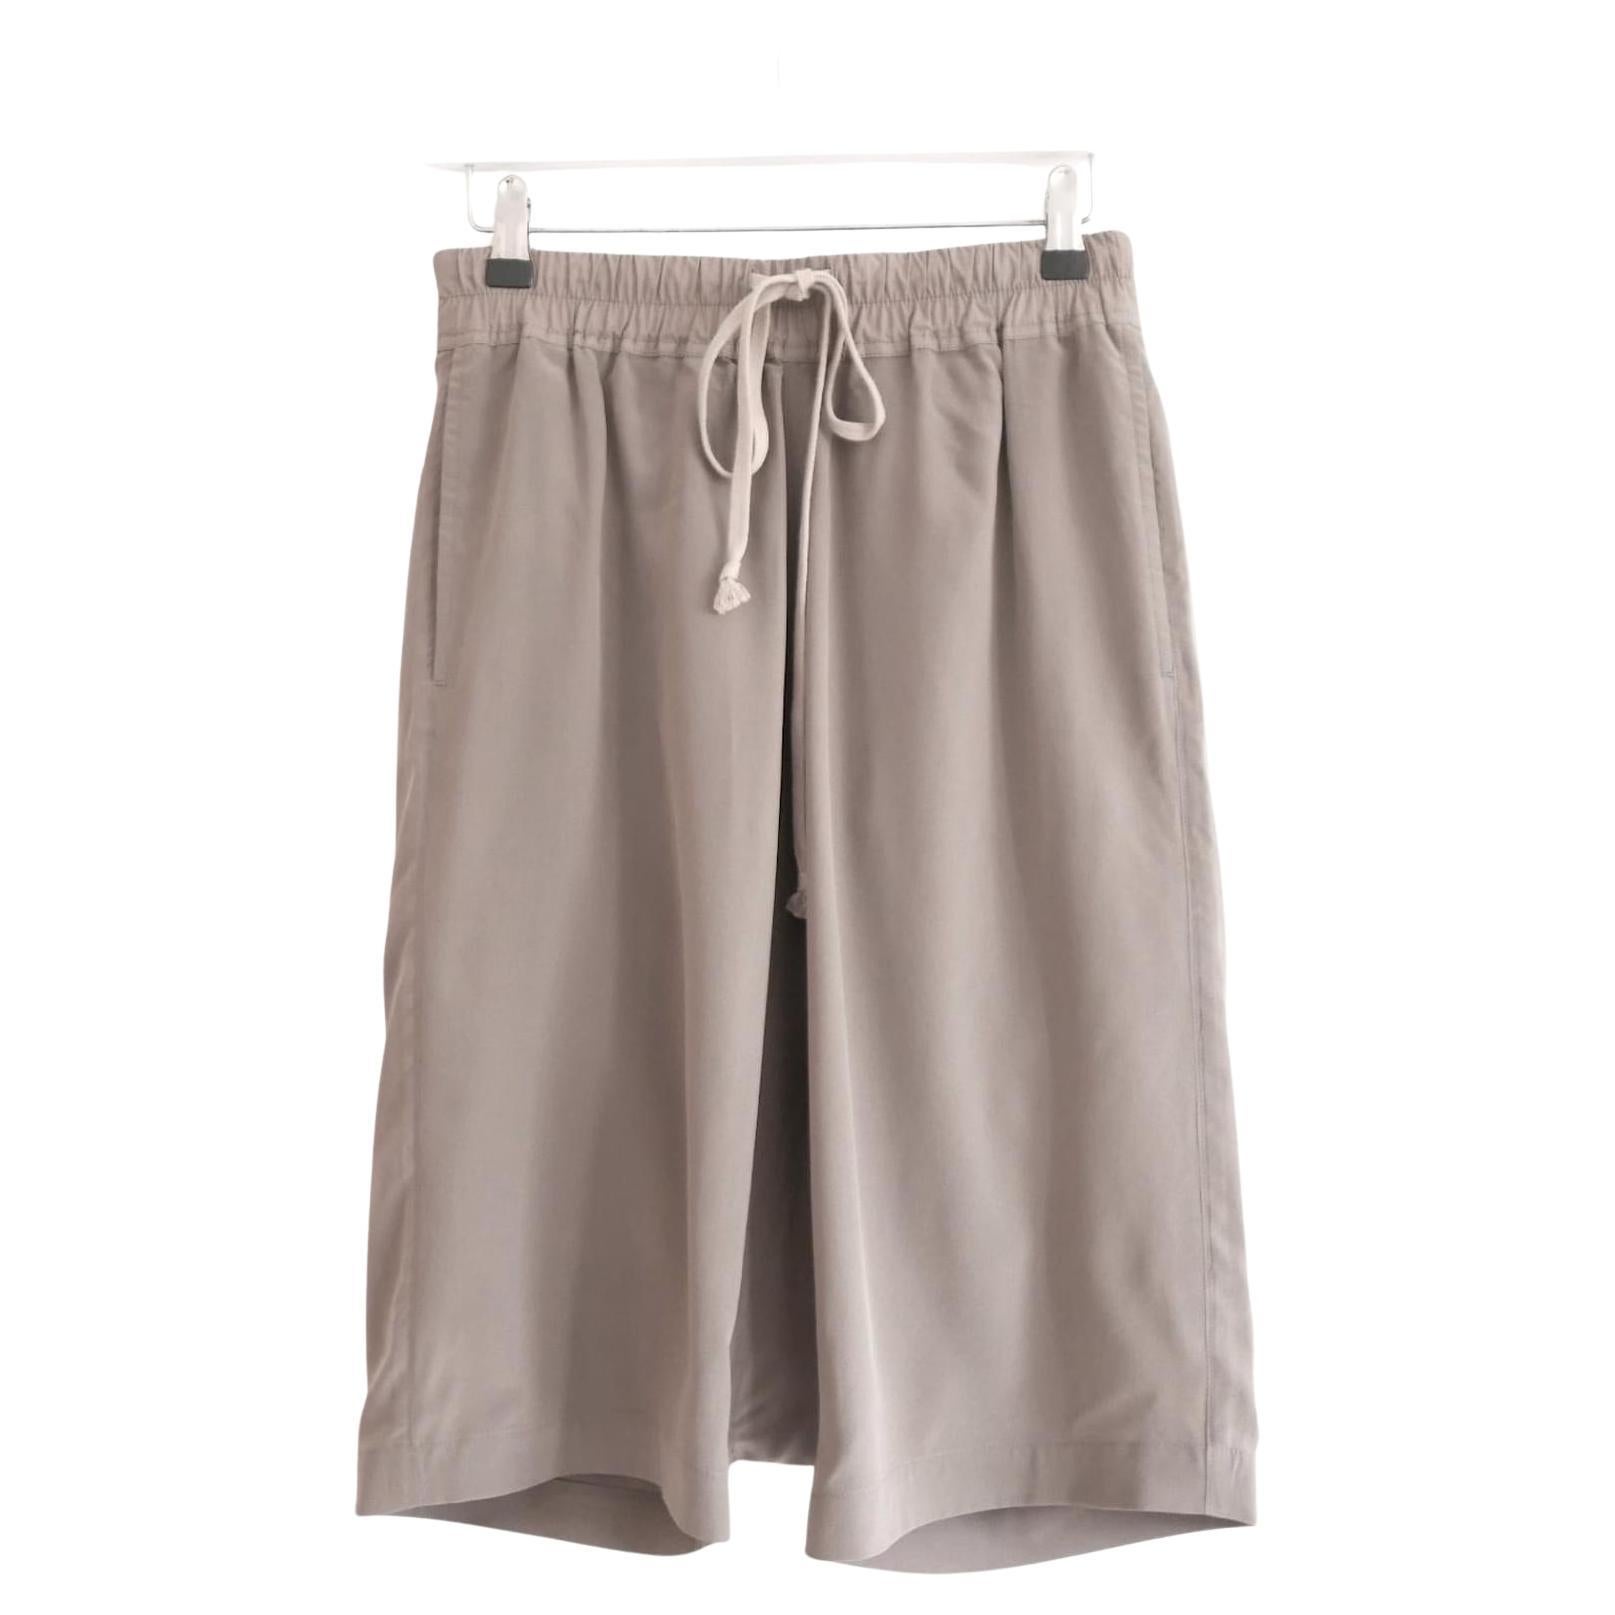 Rick Owens SS18 Sisyphus Dust Silk Pods Shorts For Sale